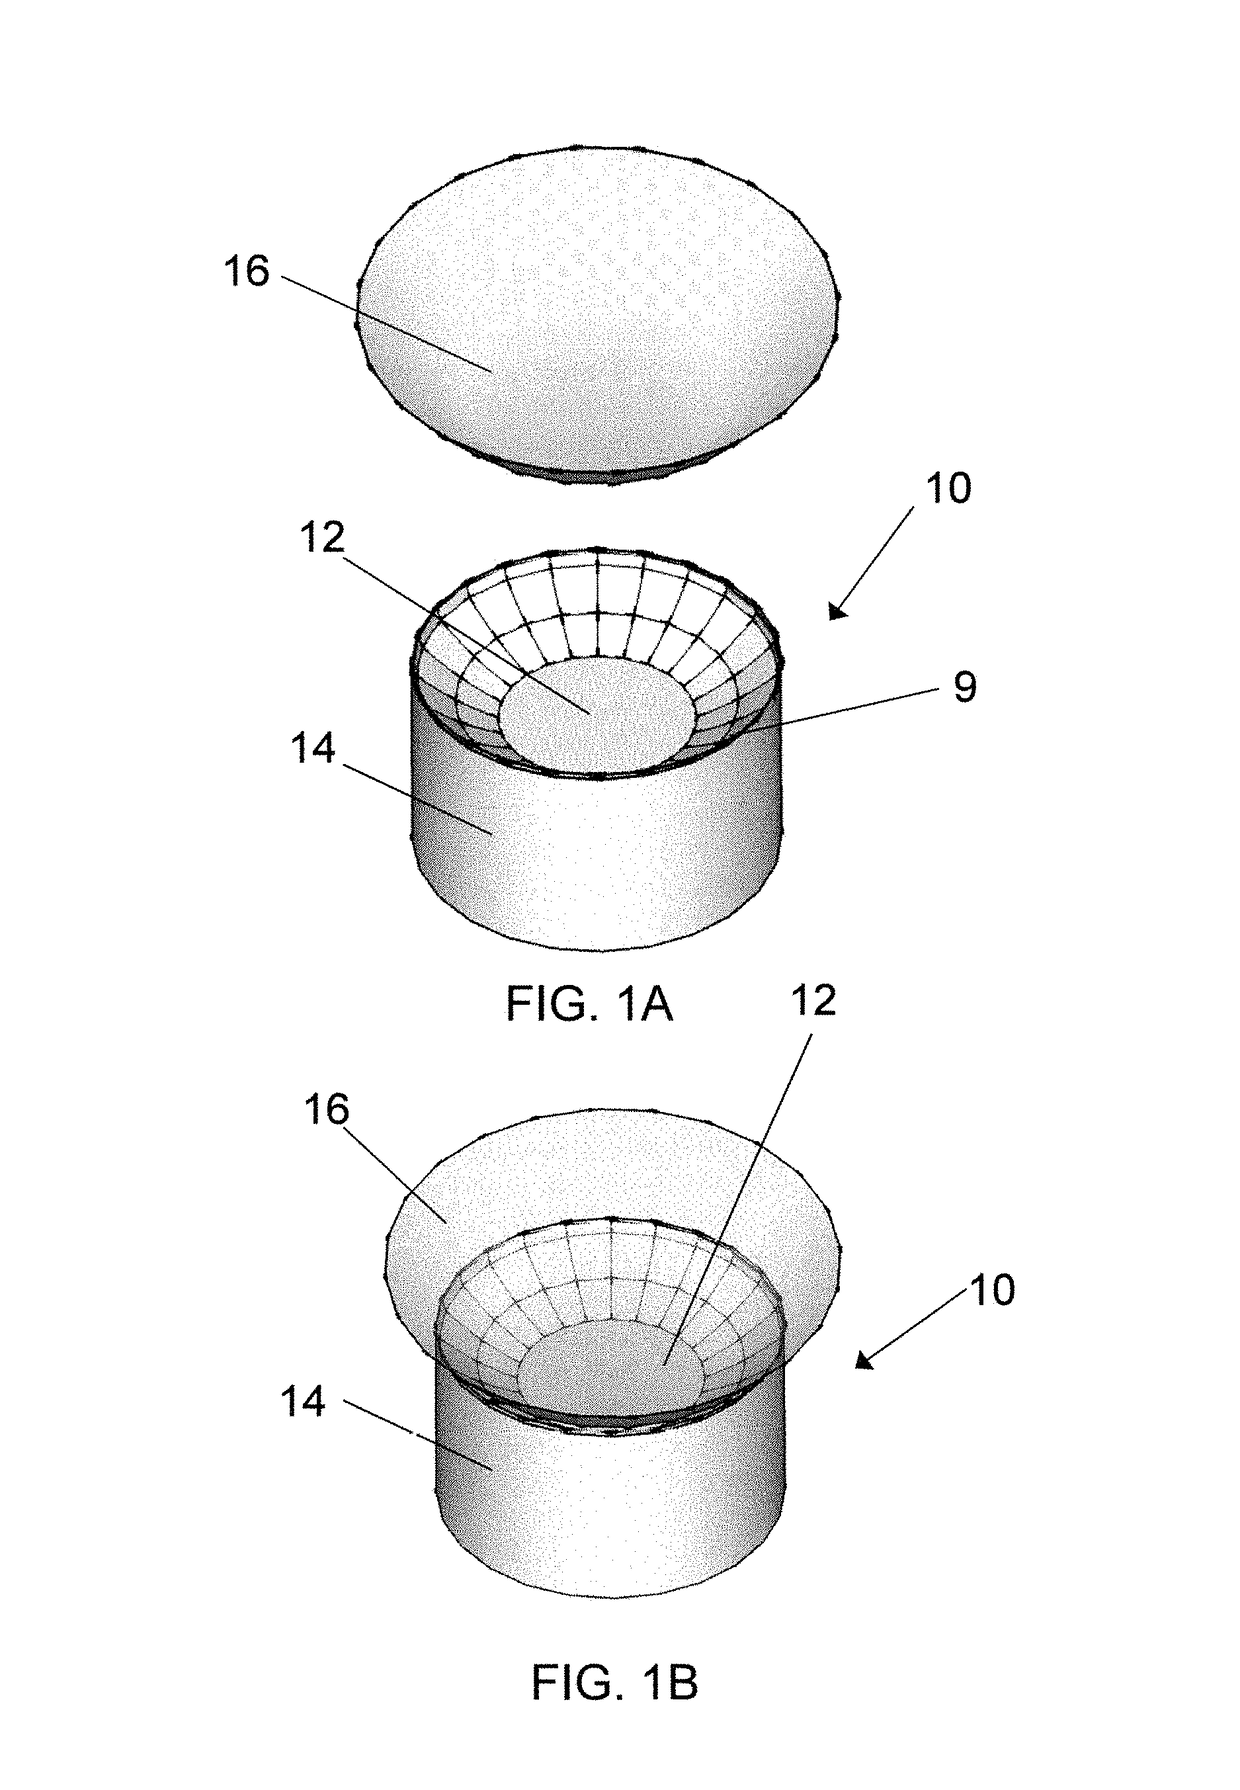 Lens aid and lens aid system and techniques for the insertion and removal of contact and scleral lenses